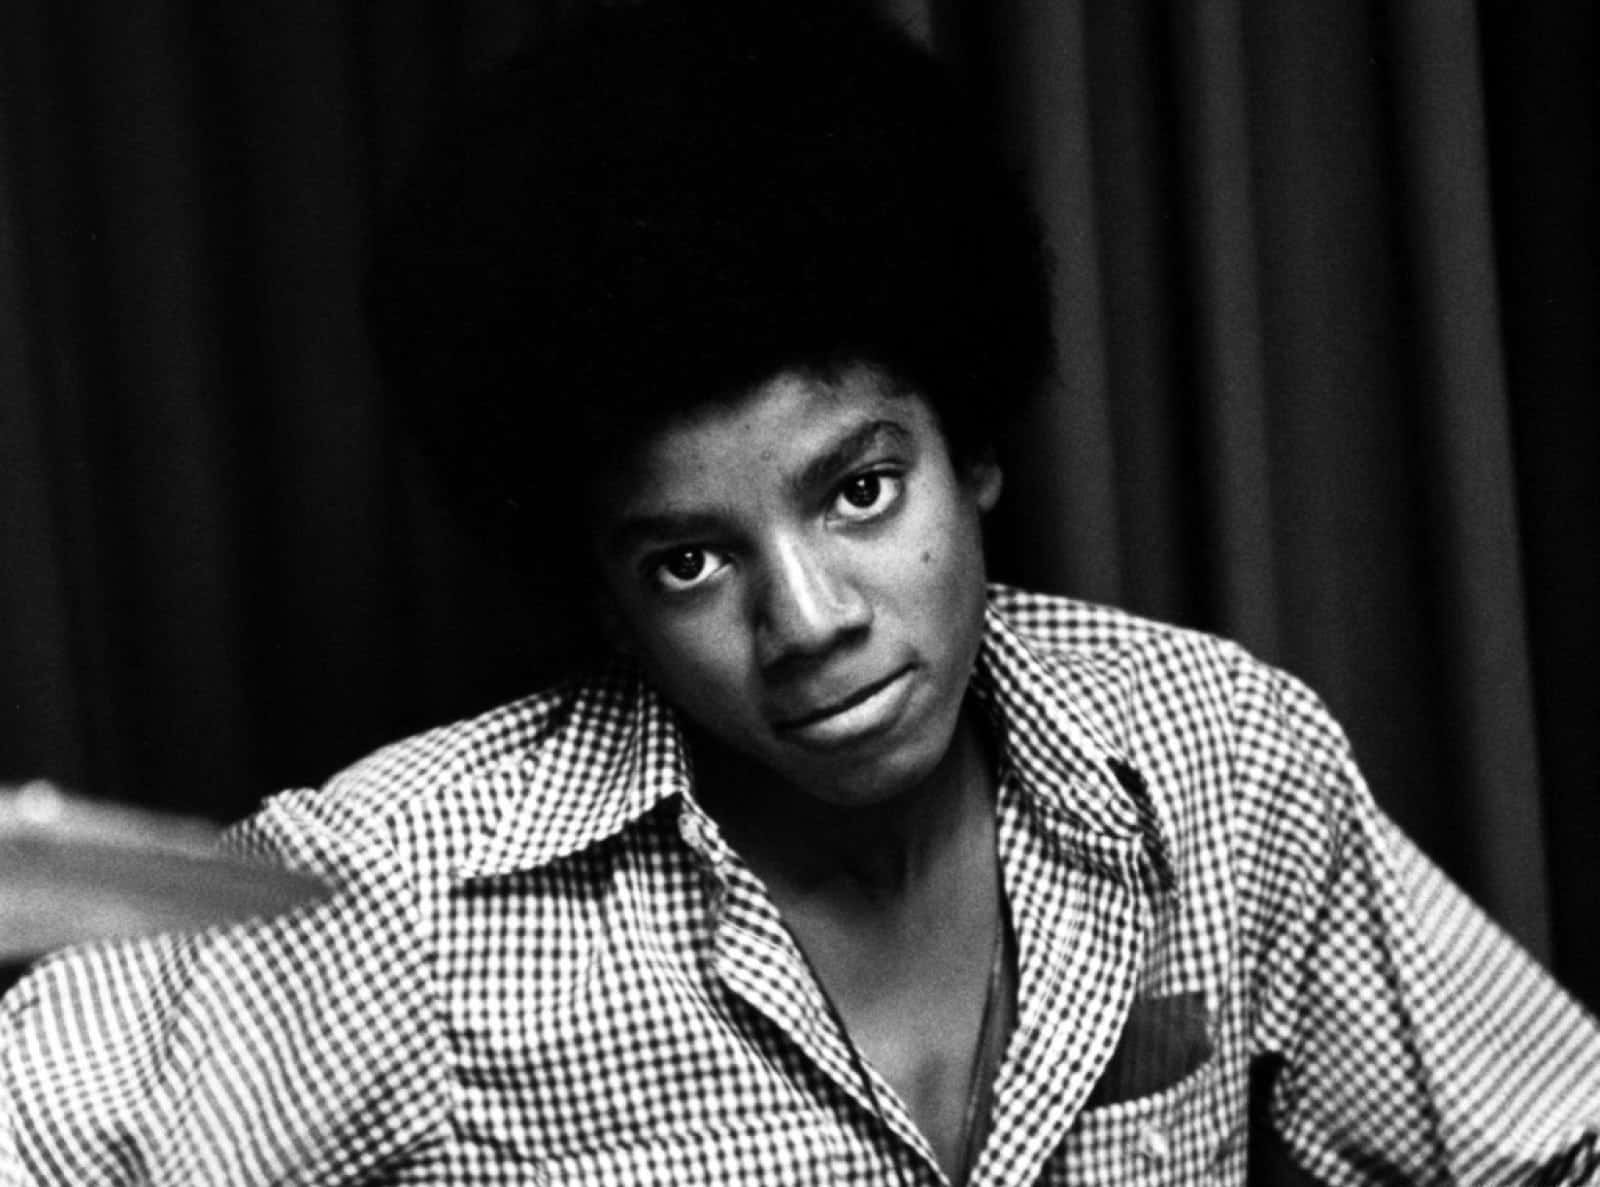 Young Michael Jackson at His Prime